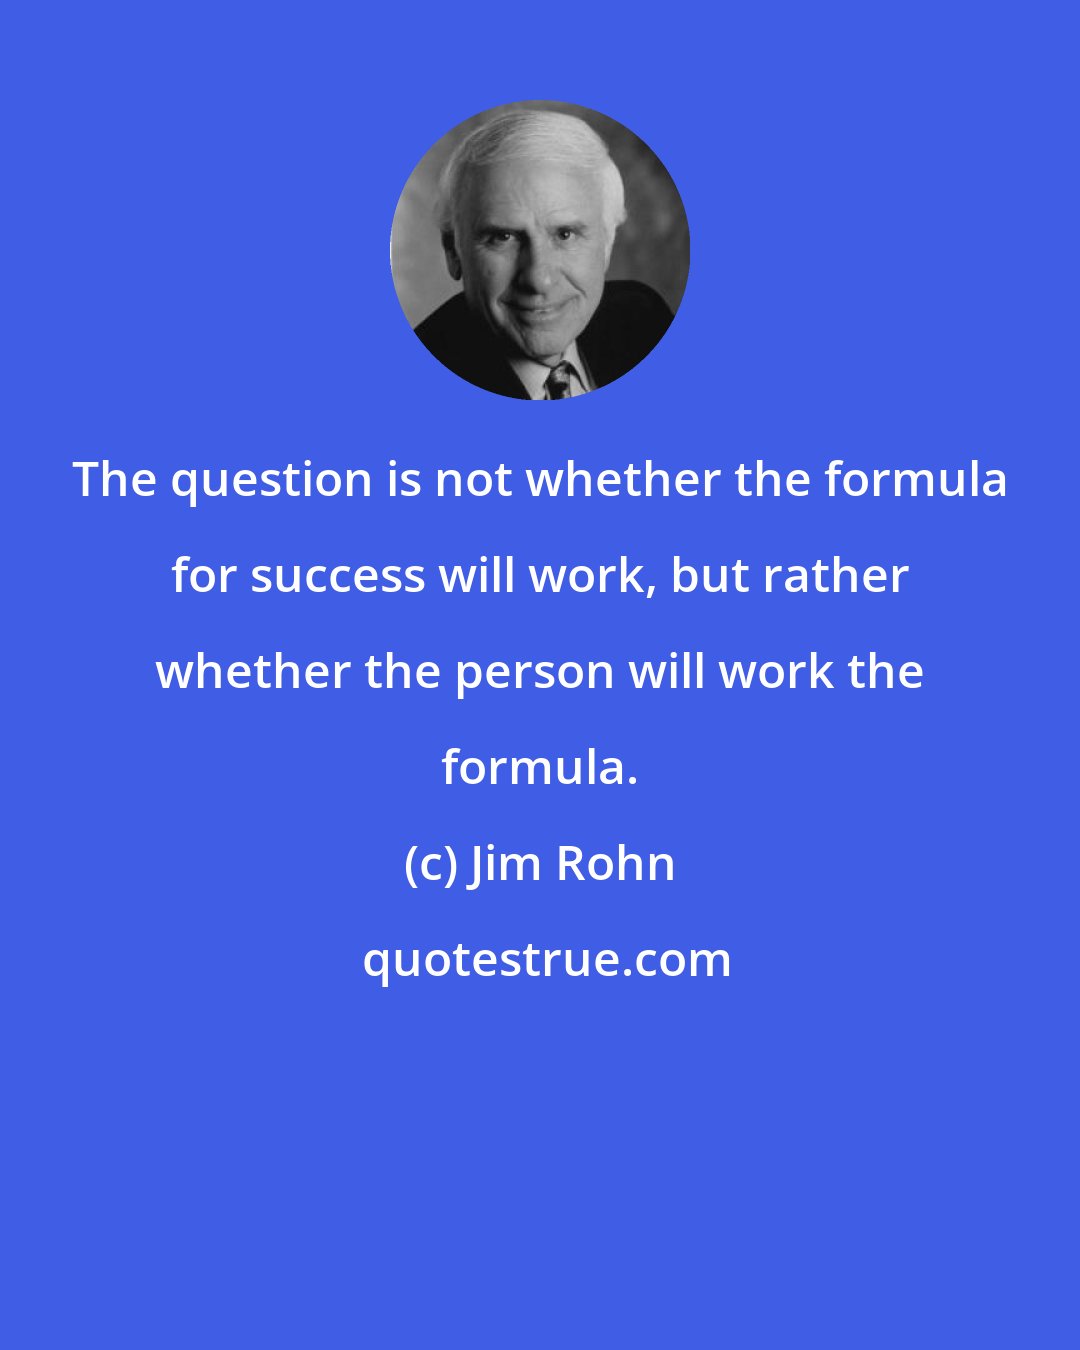 Jim Rohn: The question is not whether the formula for success will work, but rather whether the person will work the formula.